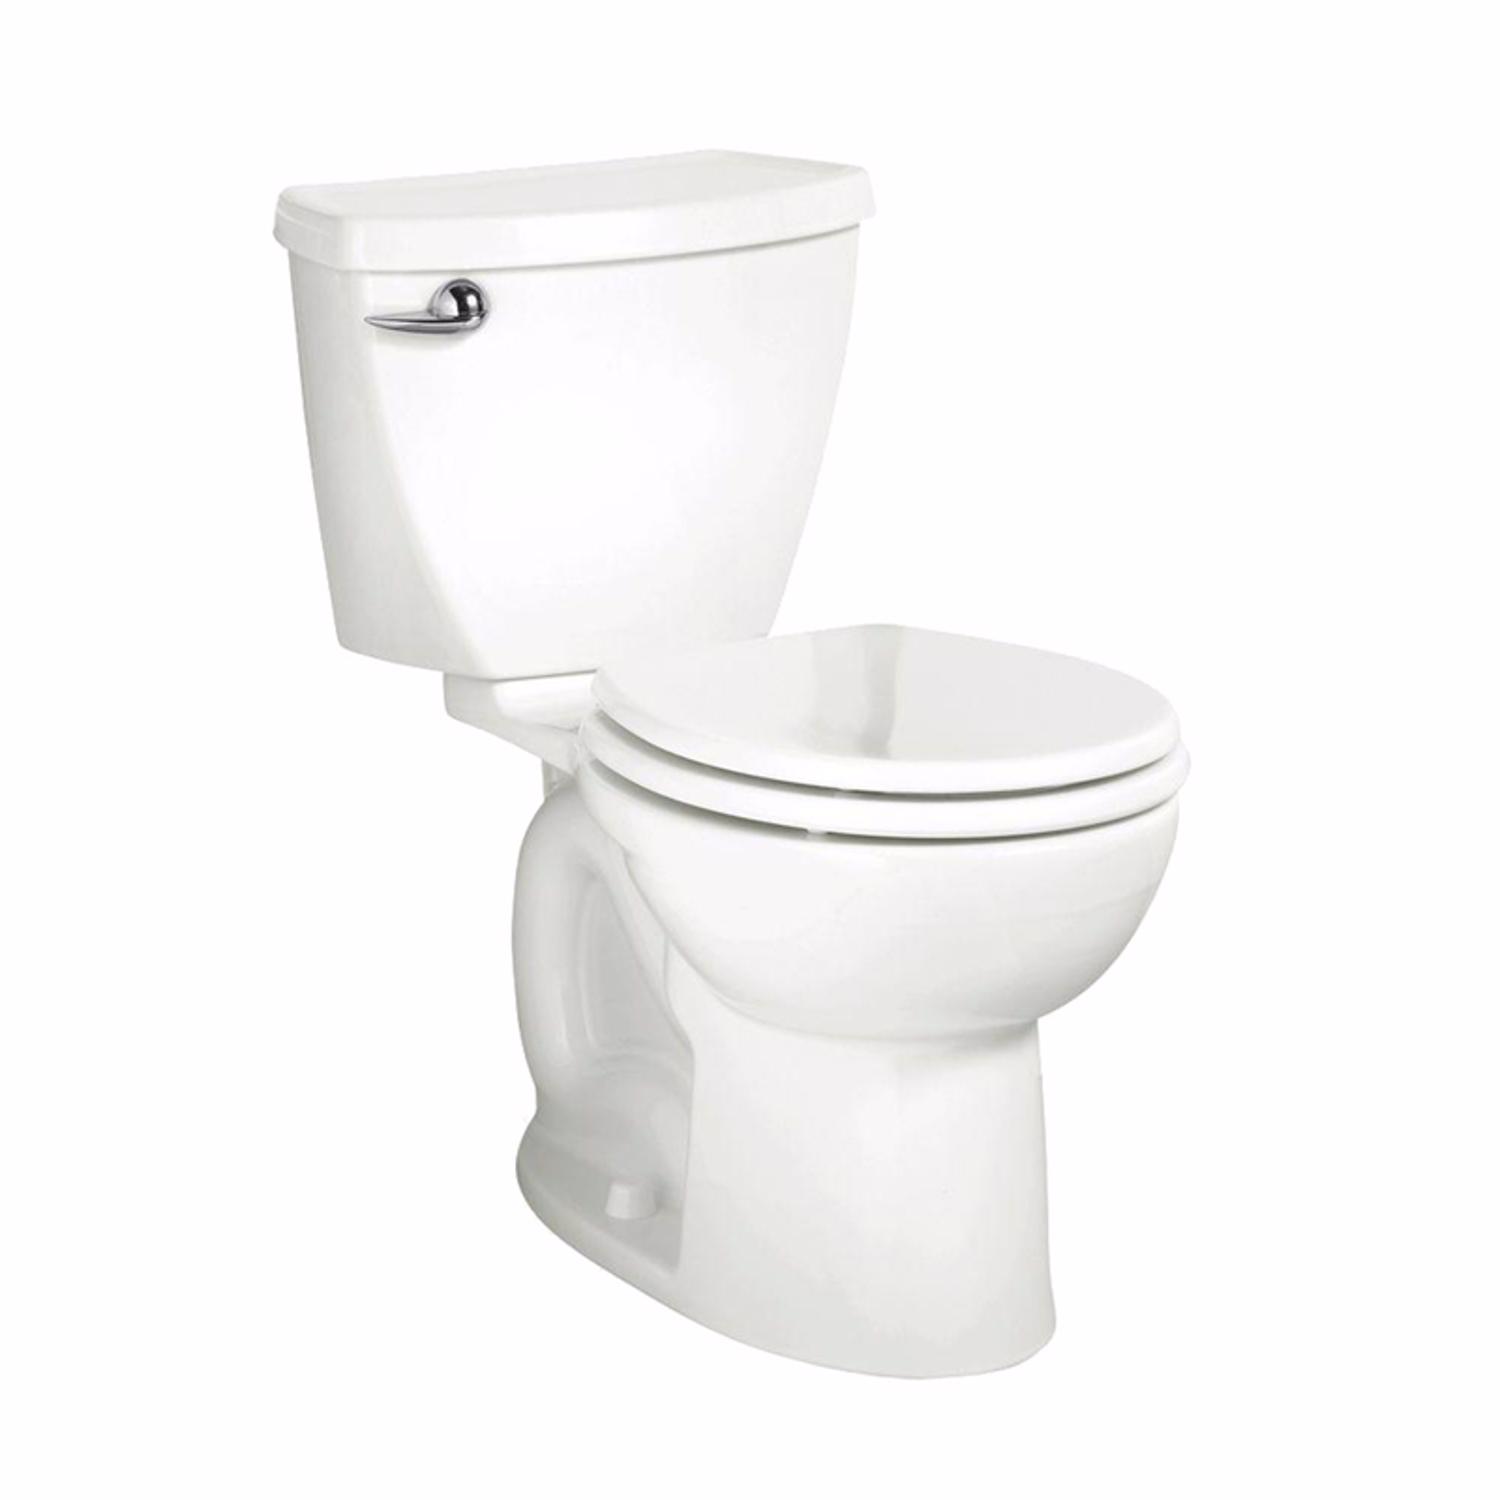 American Standard Cadet 3 Toilet-To-Go 1.28 gal White Round Complete Toilet -  2880128ST.020